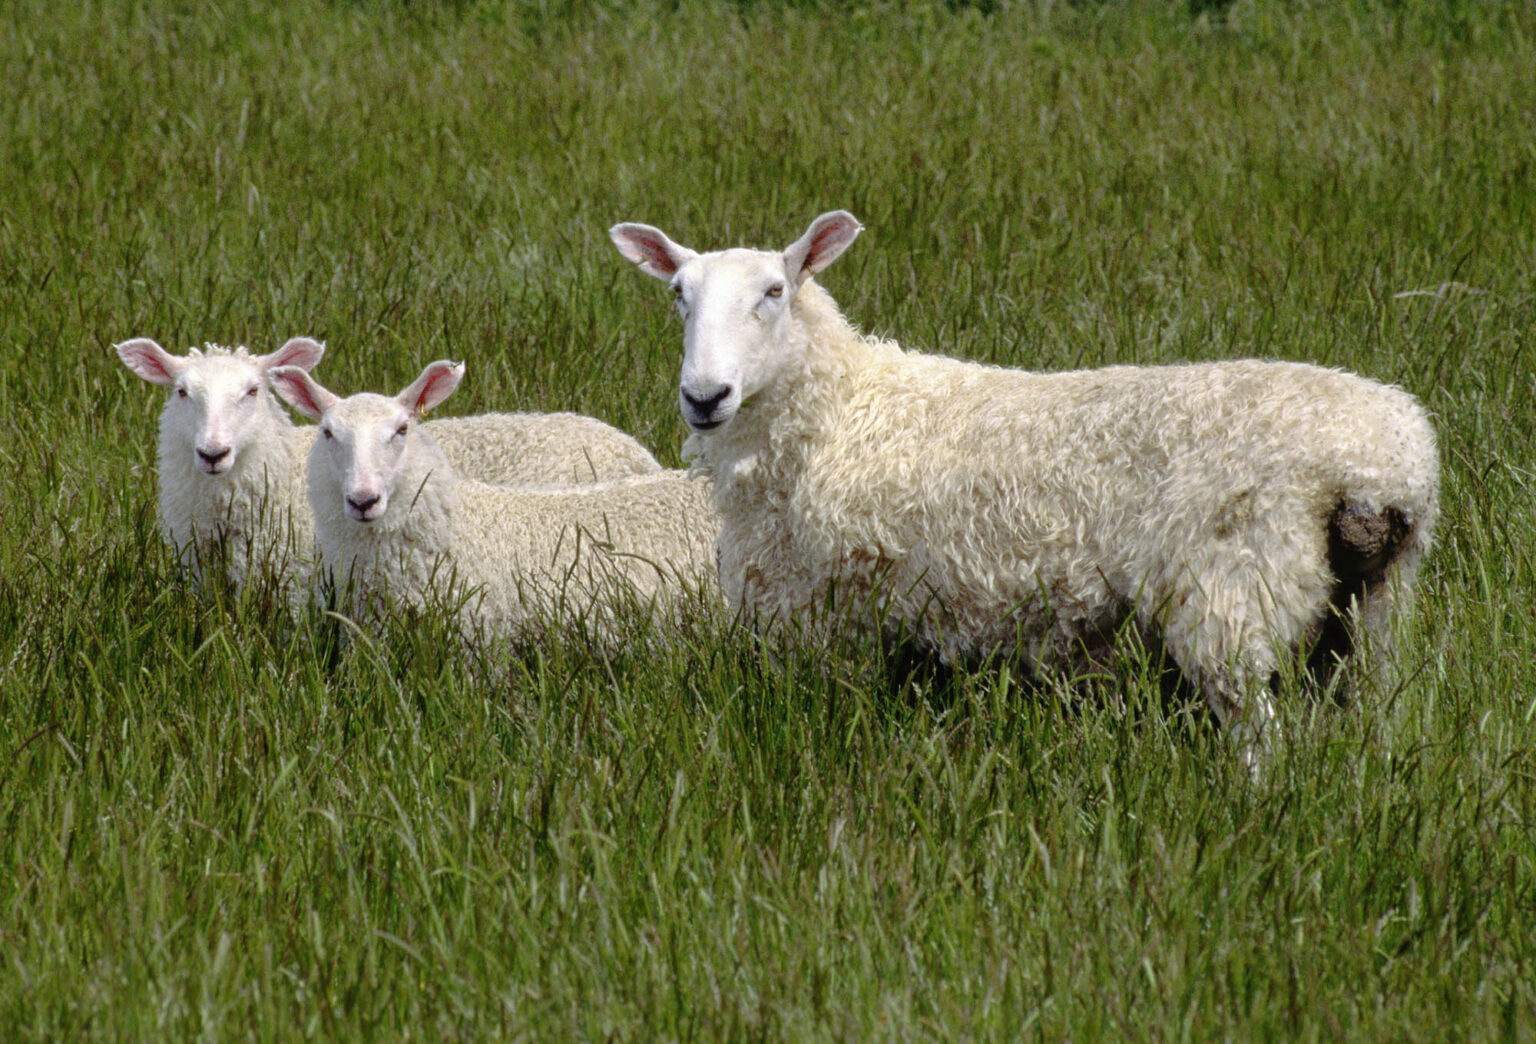 A mother with 2 lambs (part of New Zealands 70 million SHEEP) graze on lush pasture near QUEENSTOWN, NEW ZEALAND